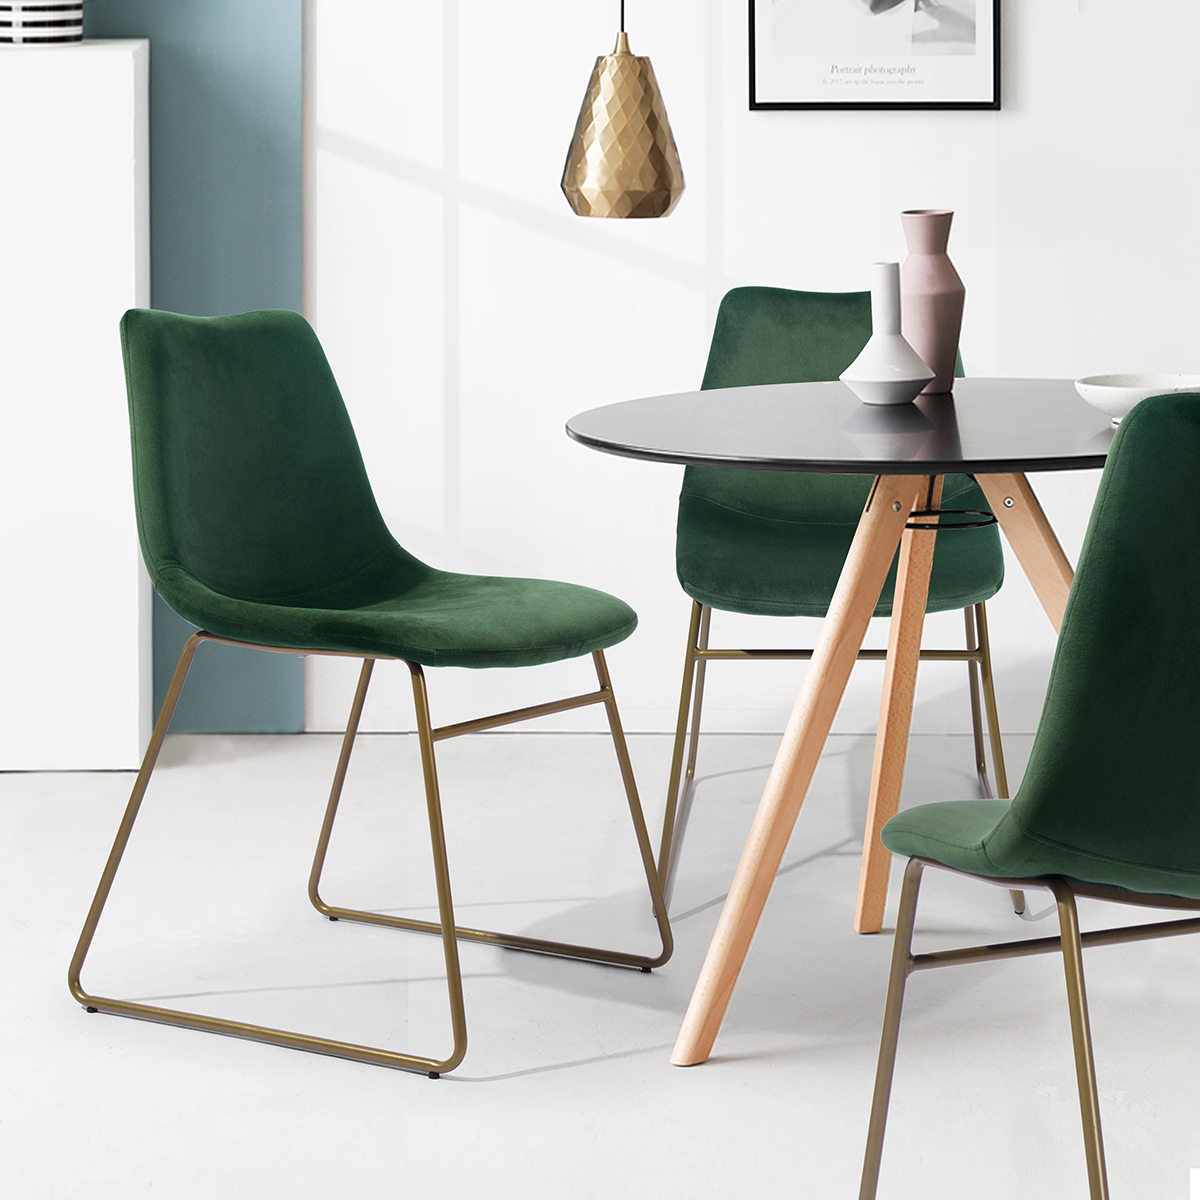 Modern Dining Chairs Set of 2, Velvet Upholstered Side Chairs with Golden Metal Legs for Dining Room Furniture,Green